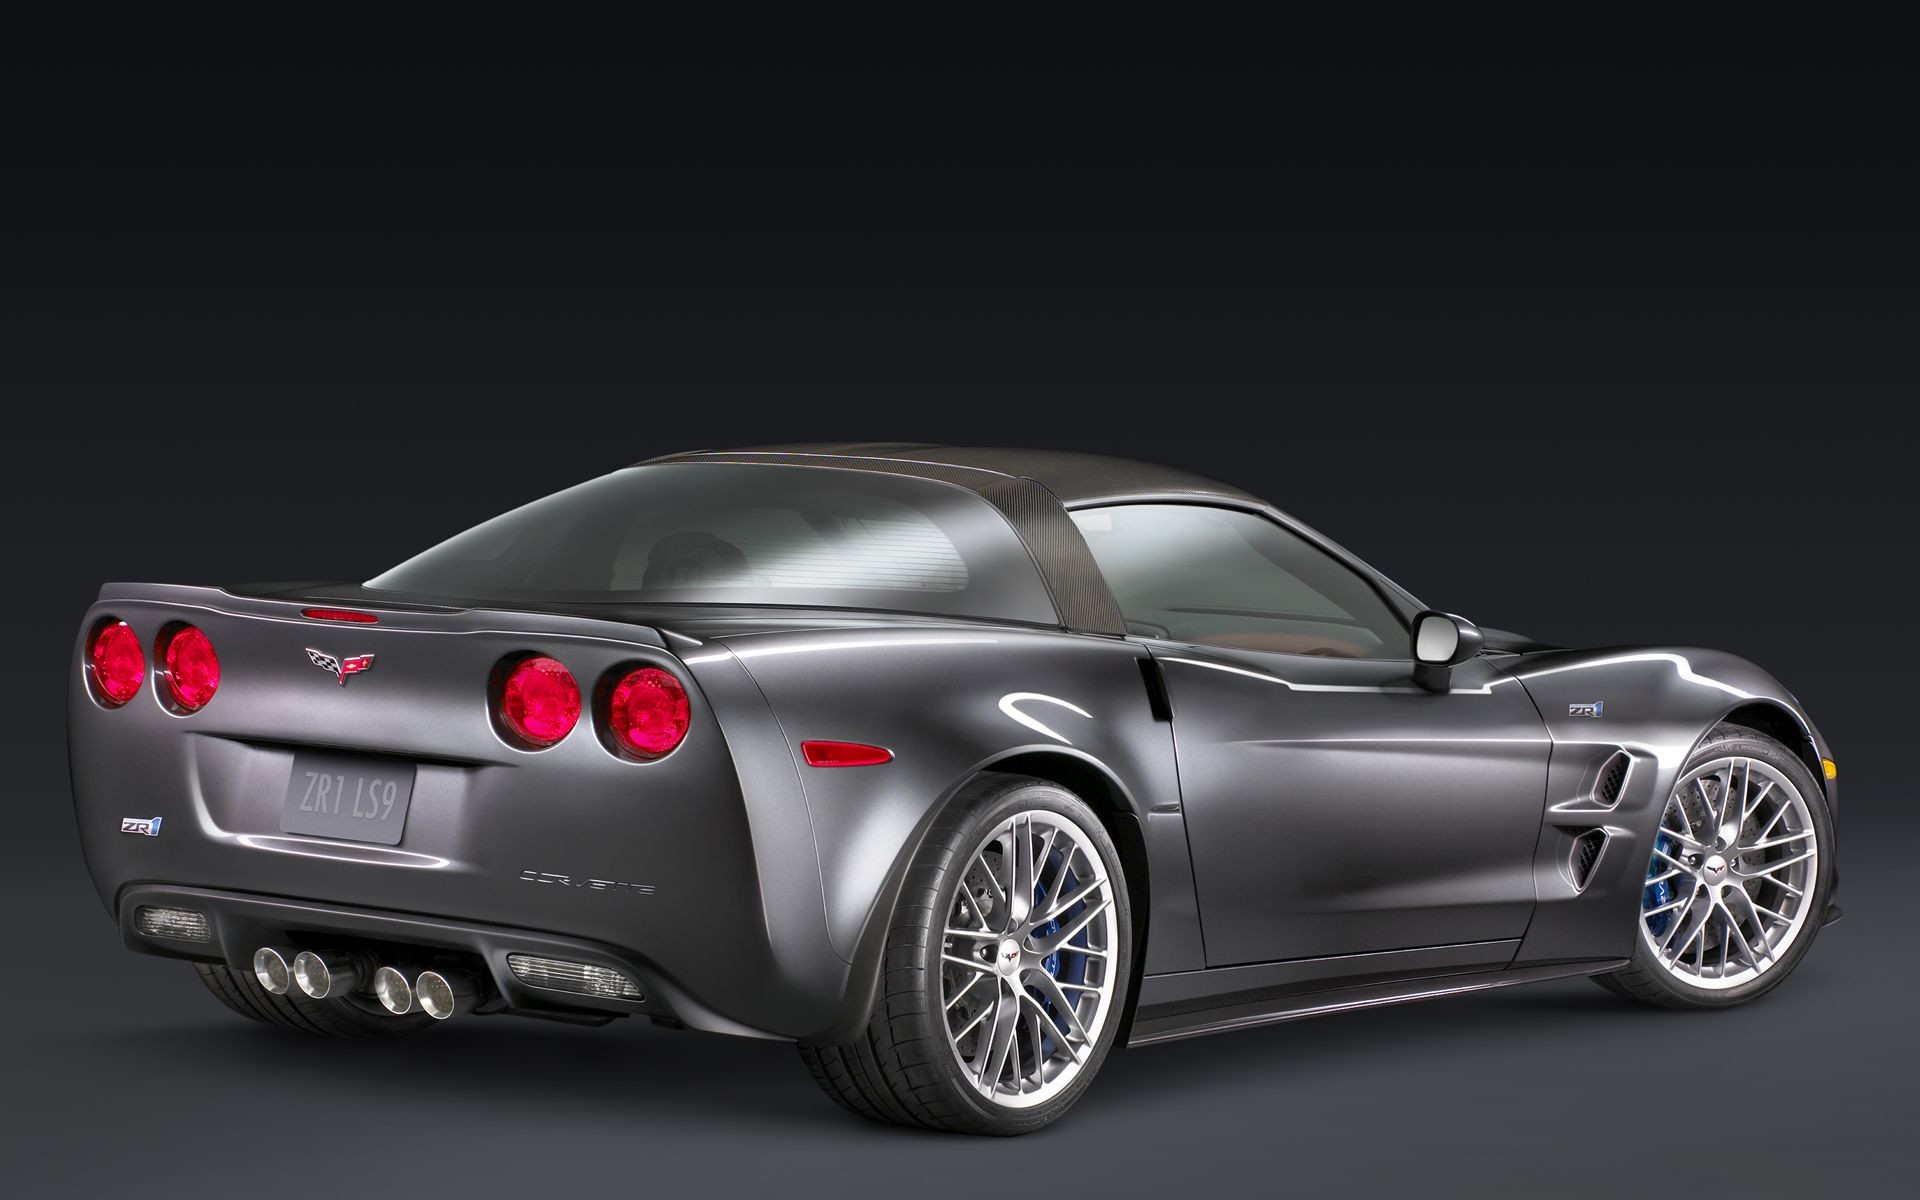 1920x1200 Image: Corvette 08 Rear wallpapers and stock photos. Â«